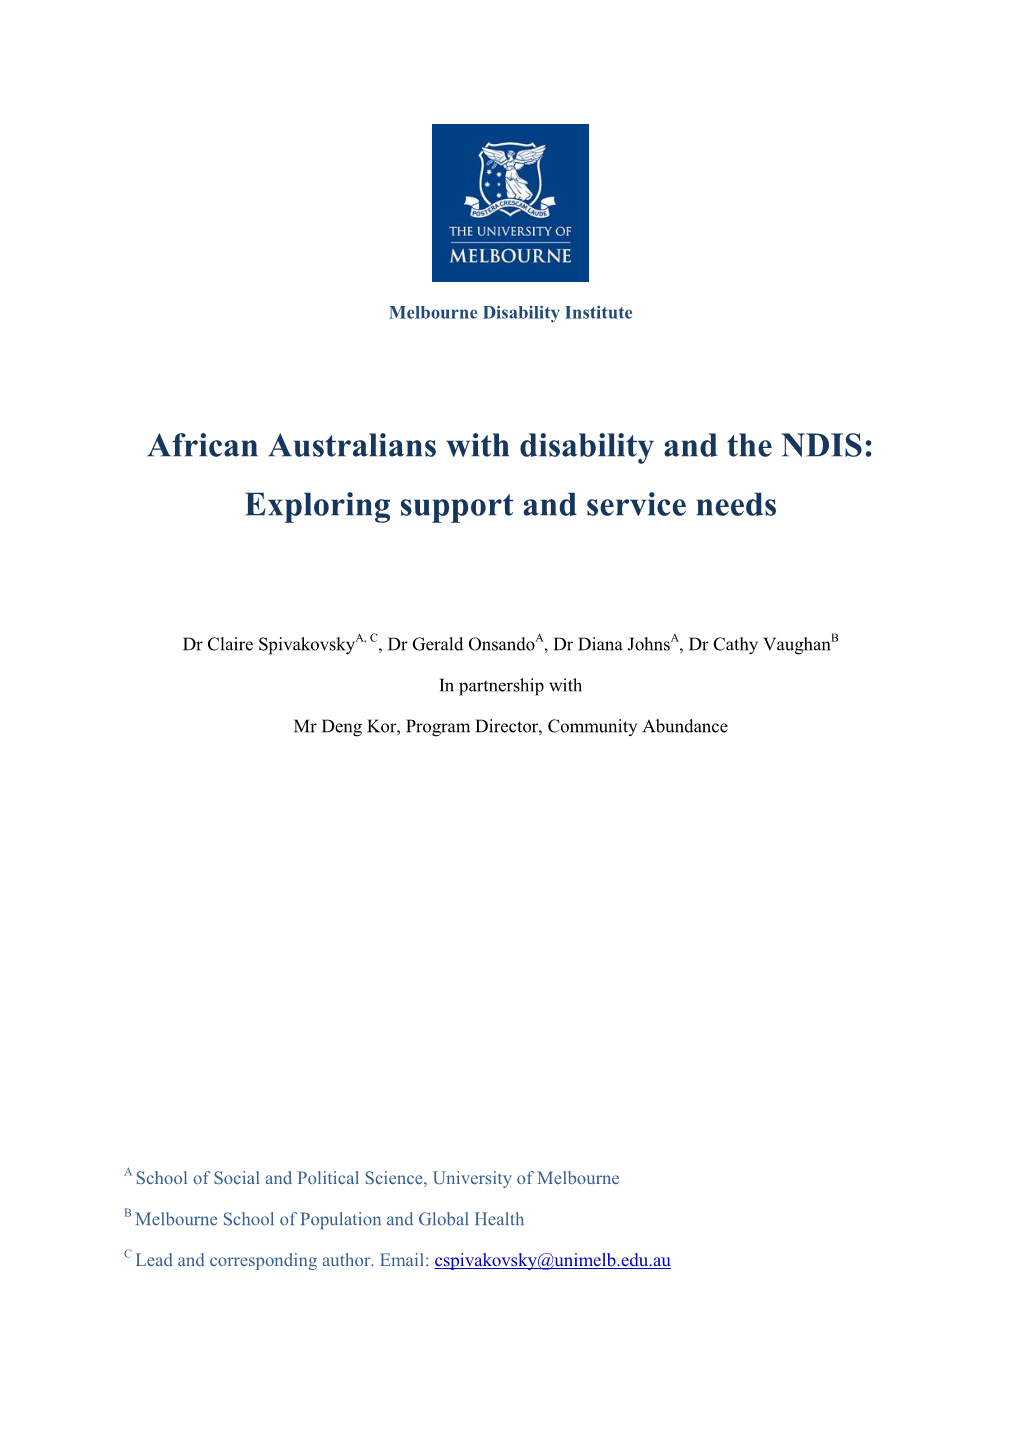 African Australians with Disability and the NDIS: Exploring Support and Service Needs